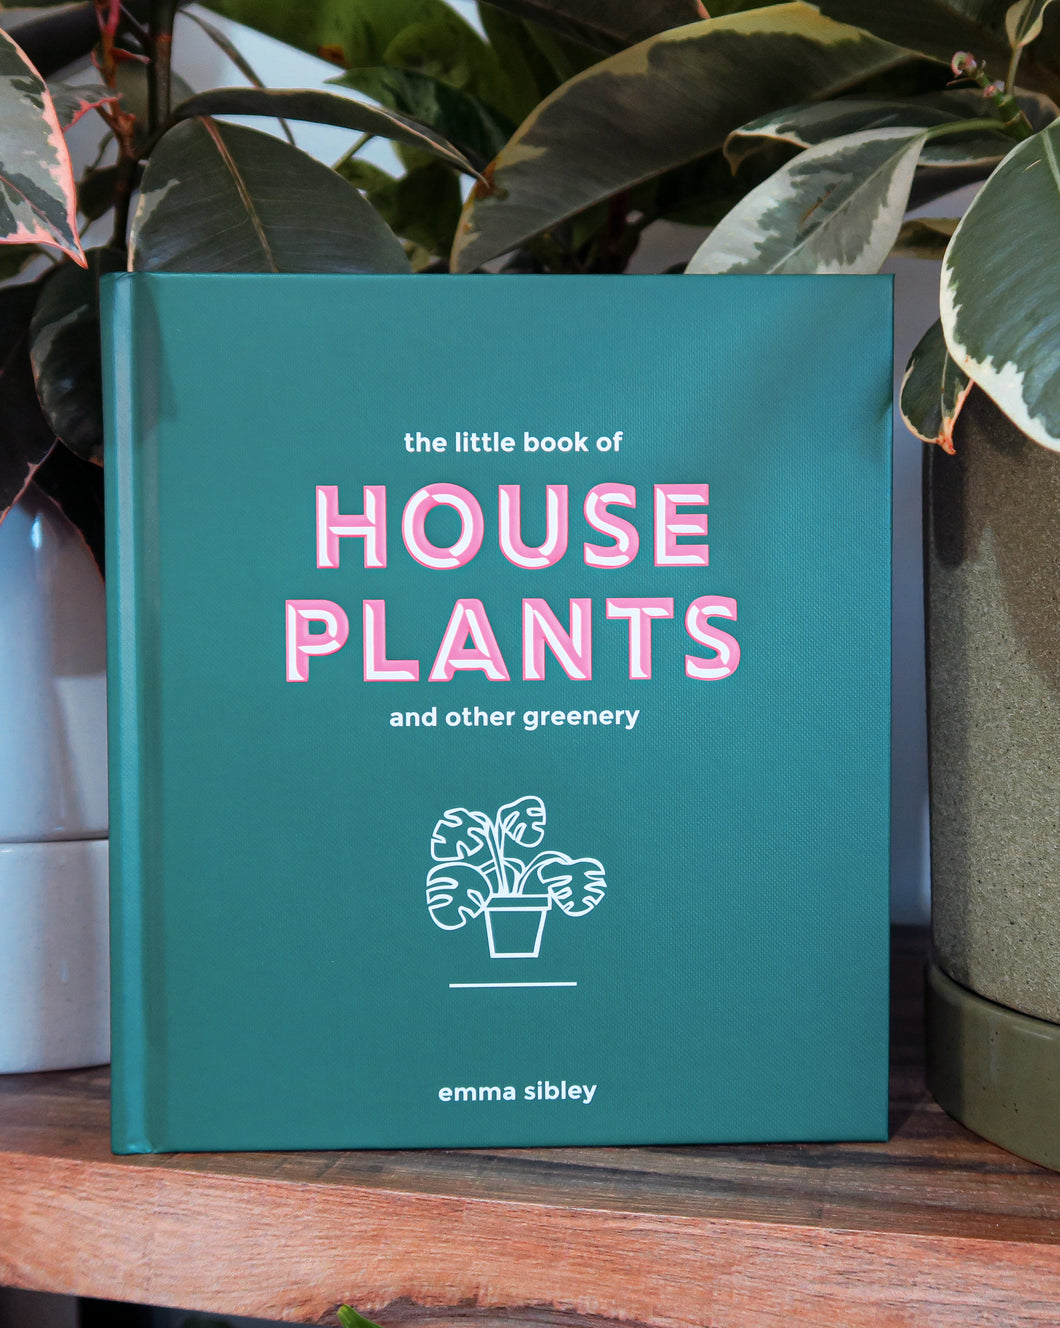 The Little Book of House Plants and Other Greenery by Emma Sibley